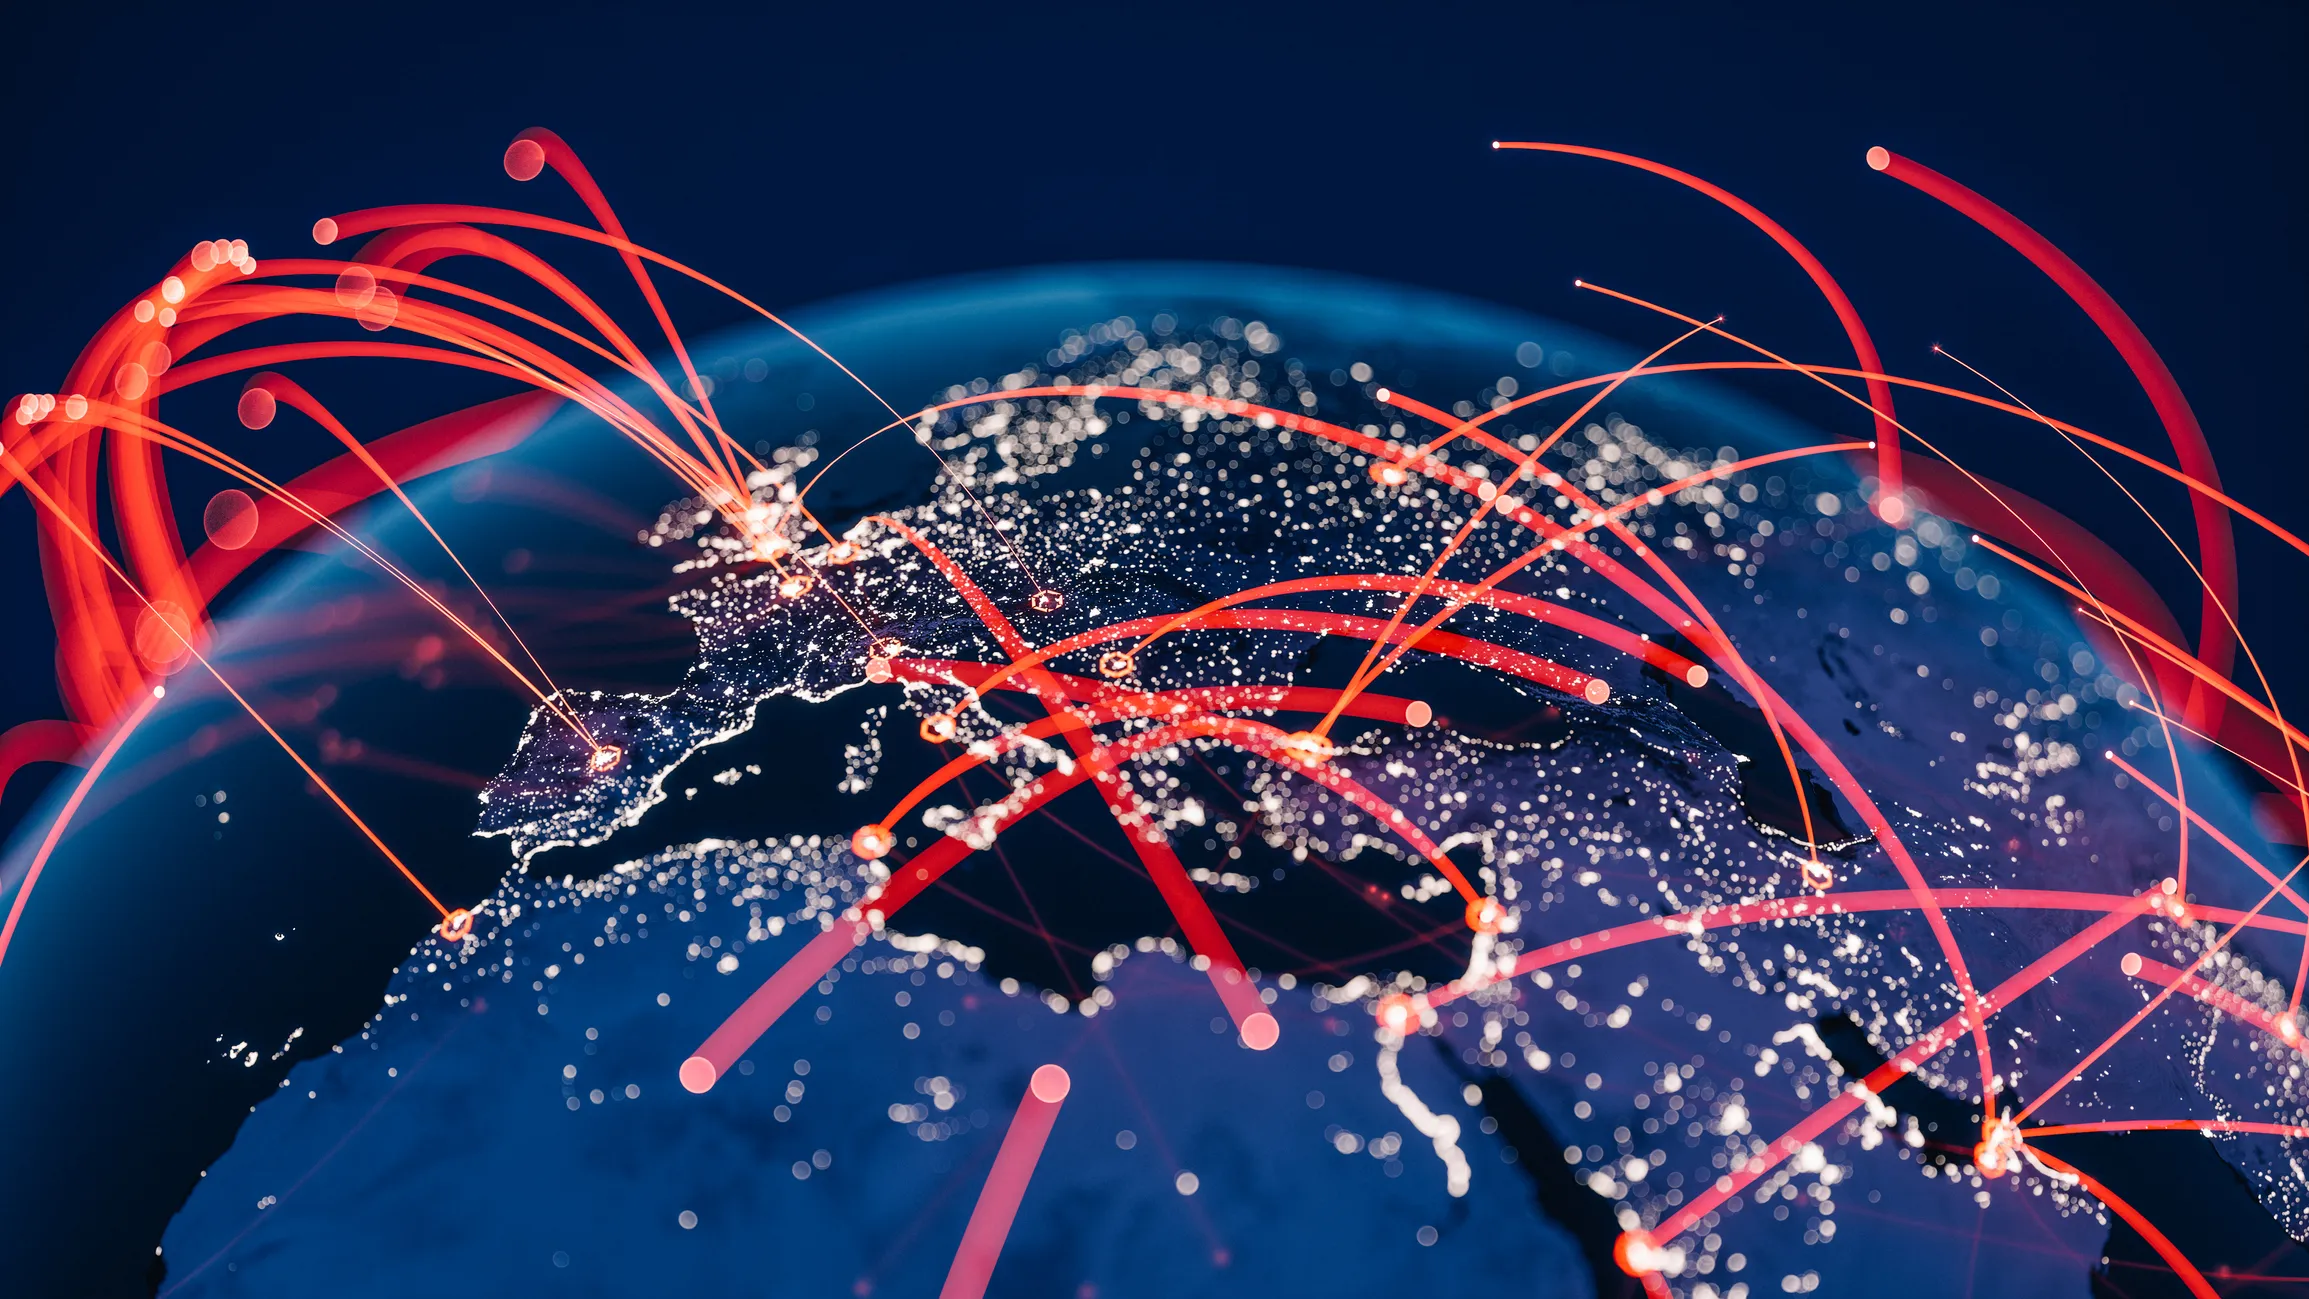 View of blue globe at night with connection lines between cities, representing global supply chains.